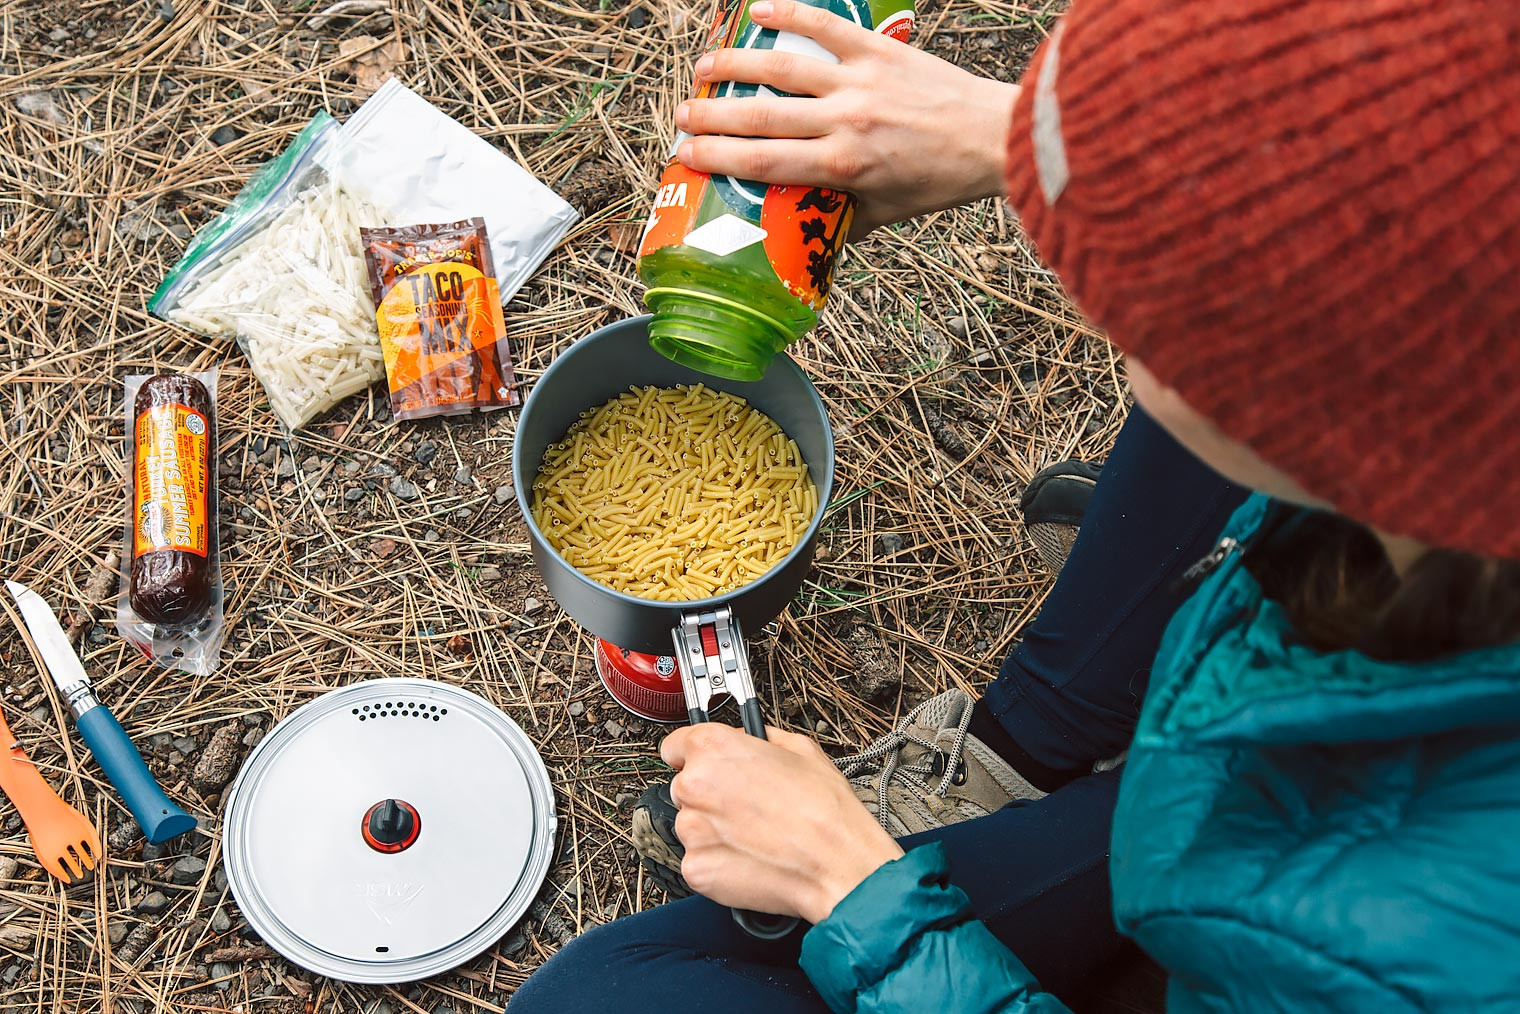 Backpacking Dinner Ideas
 22 Simple Backpacking Meal Ideas from Trader Joe’s Fresh